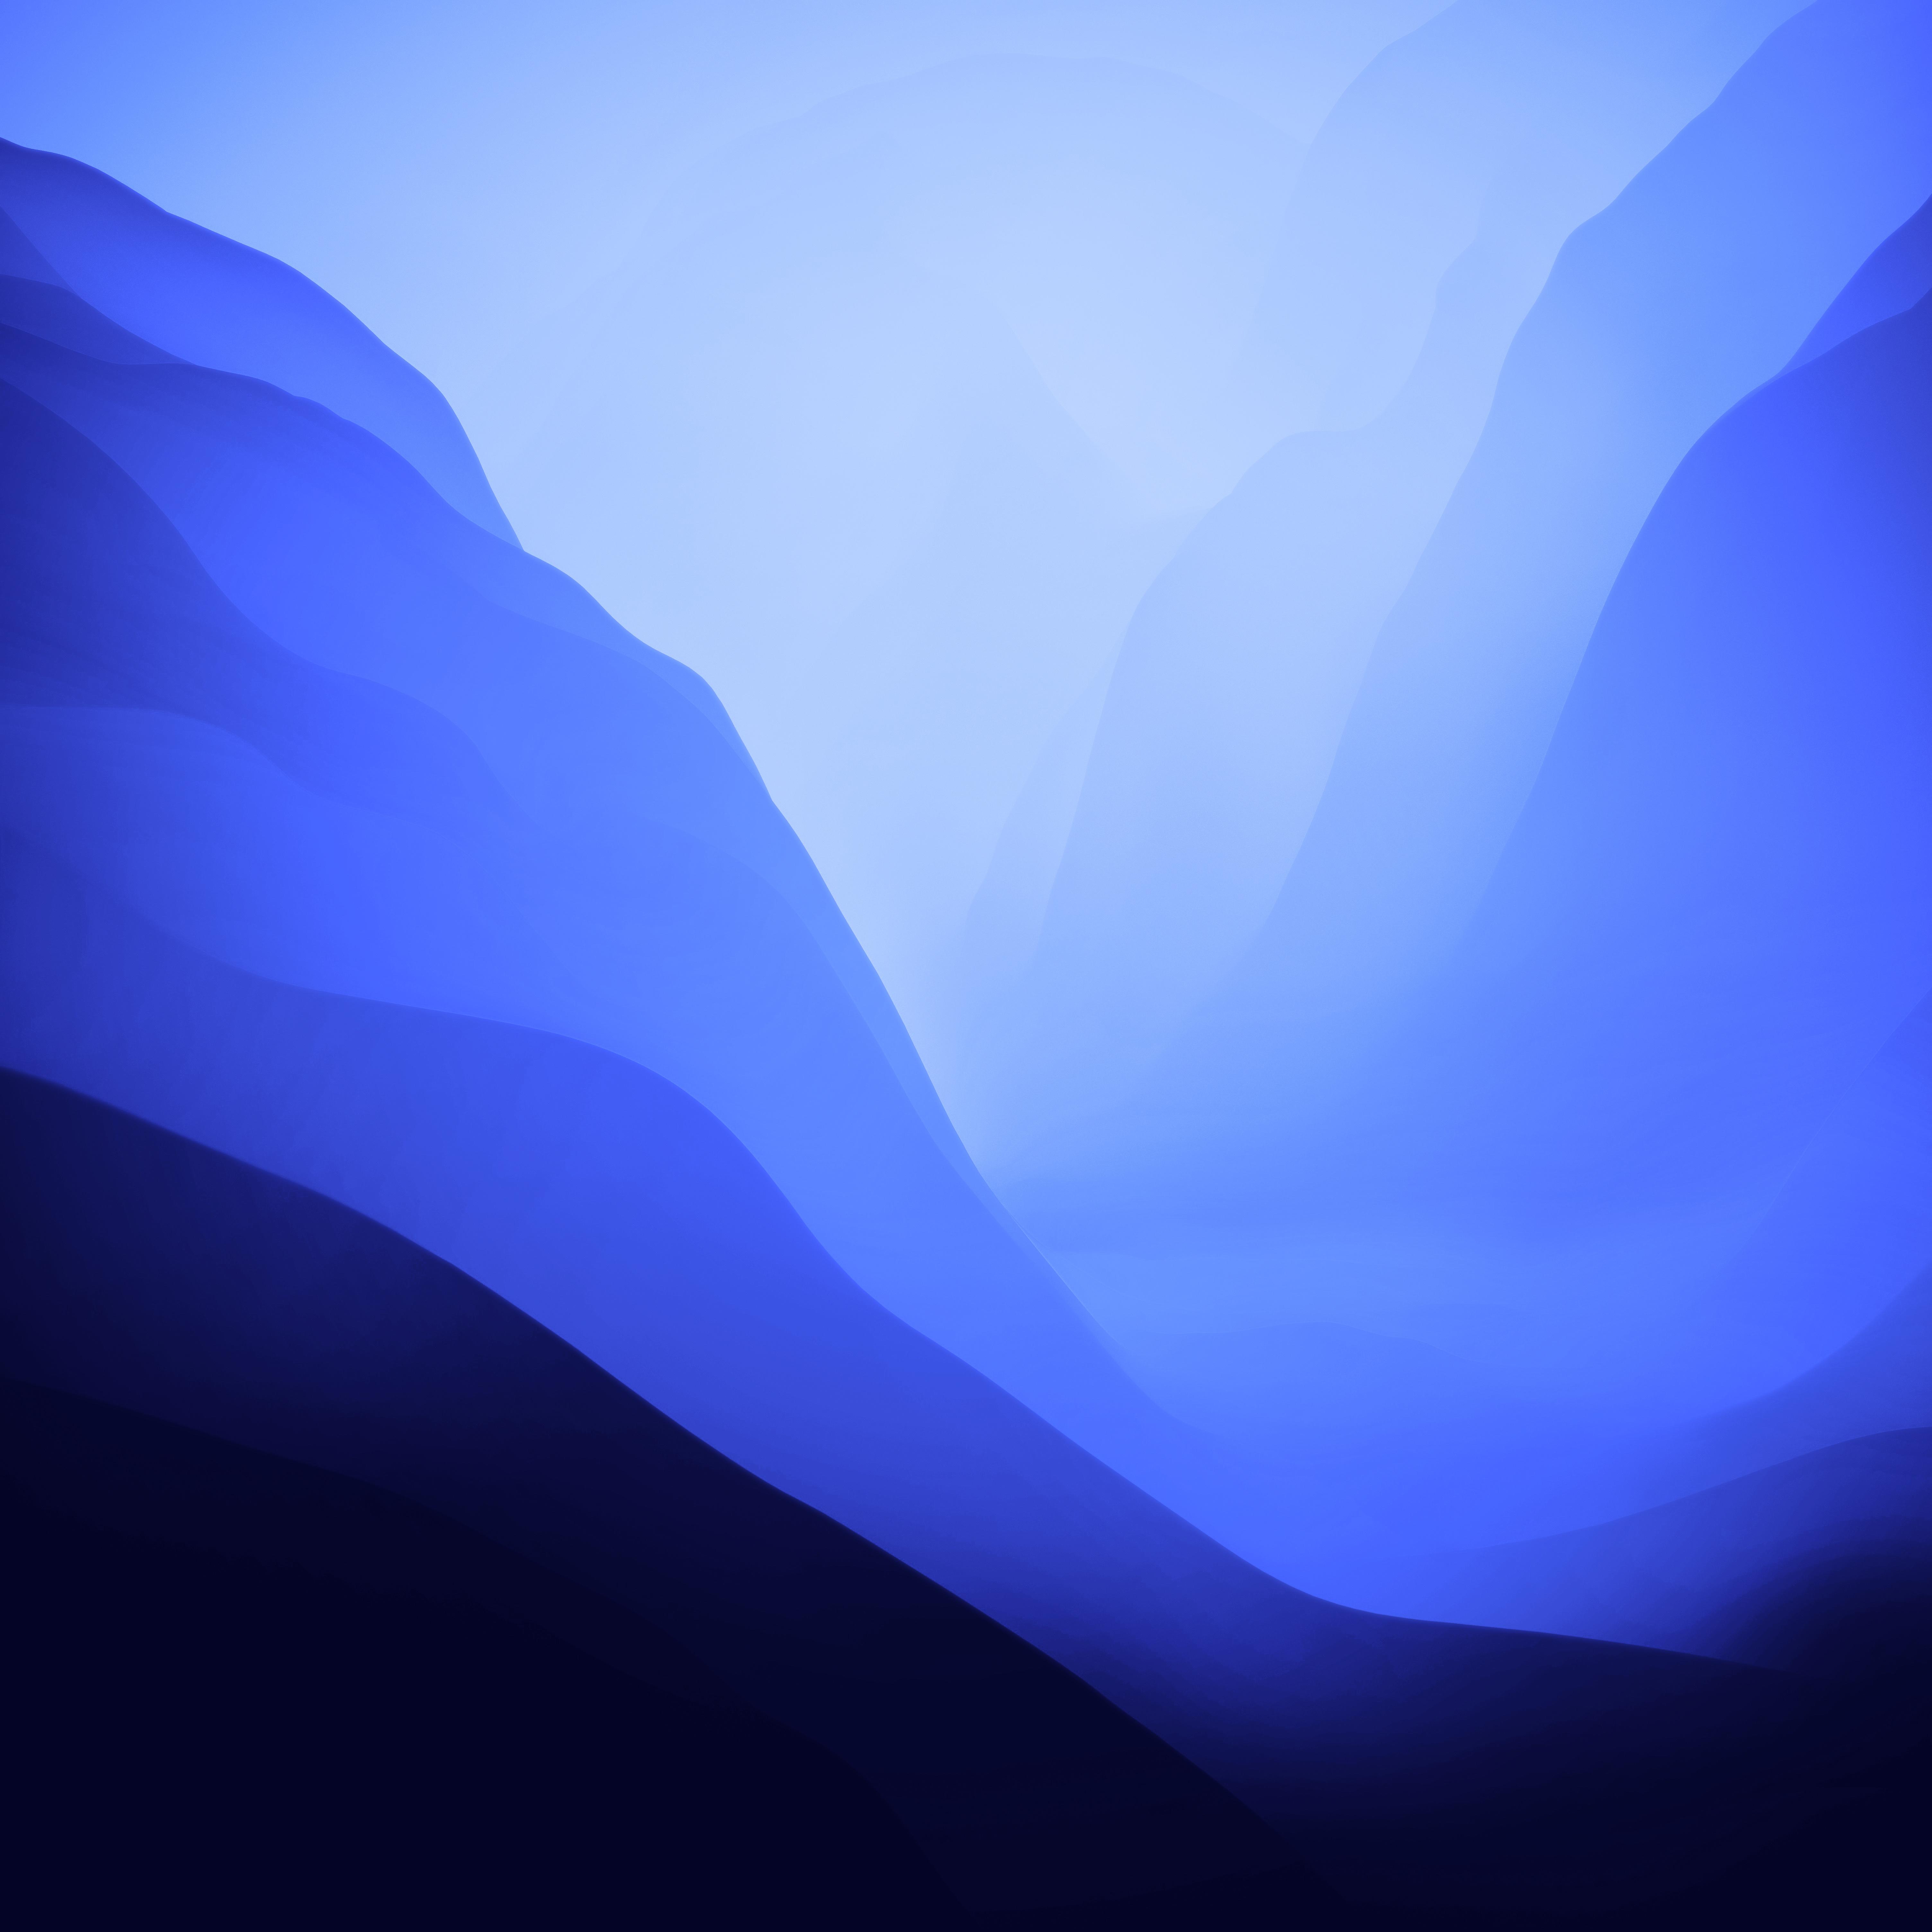 Now i recreated MacOS Monterey dark wallpaper and now you can download my  recreated wallpapers in different colors BW light and dark in added  download link I included some screenshots of my